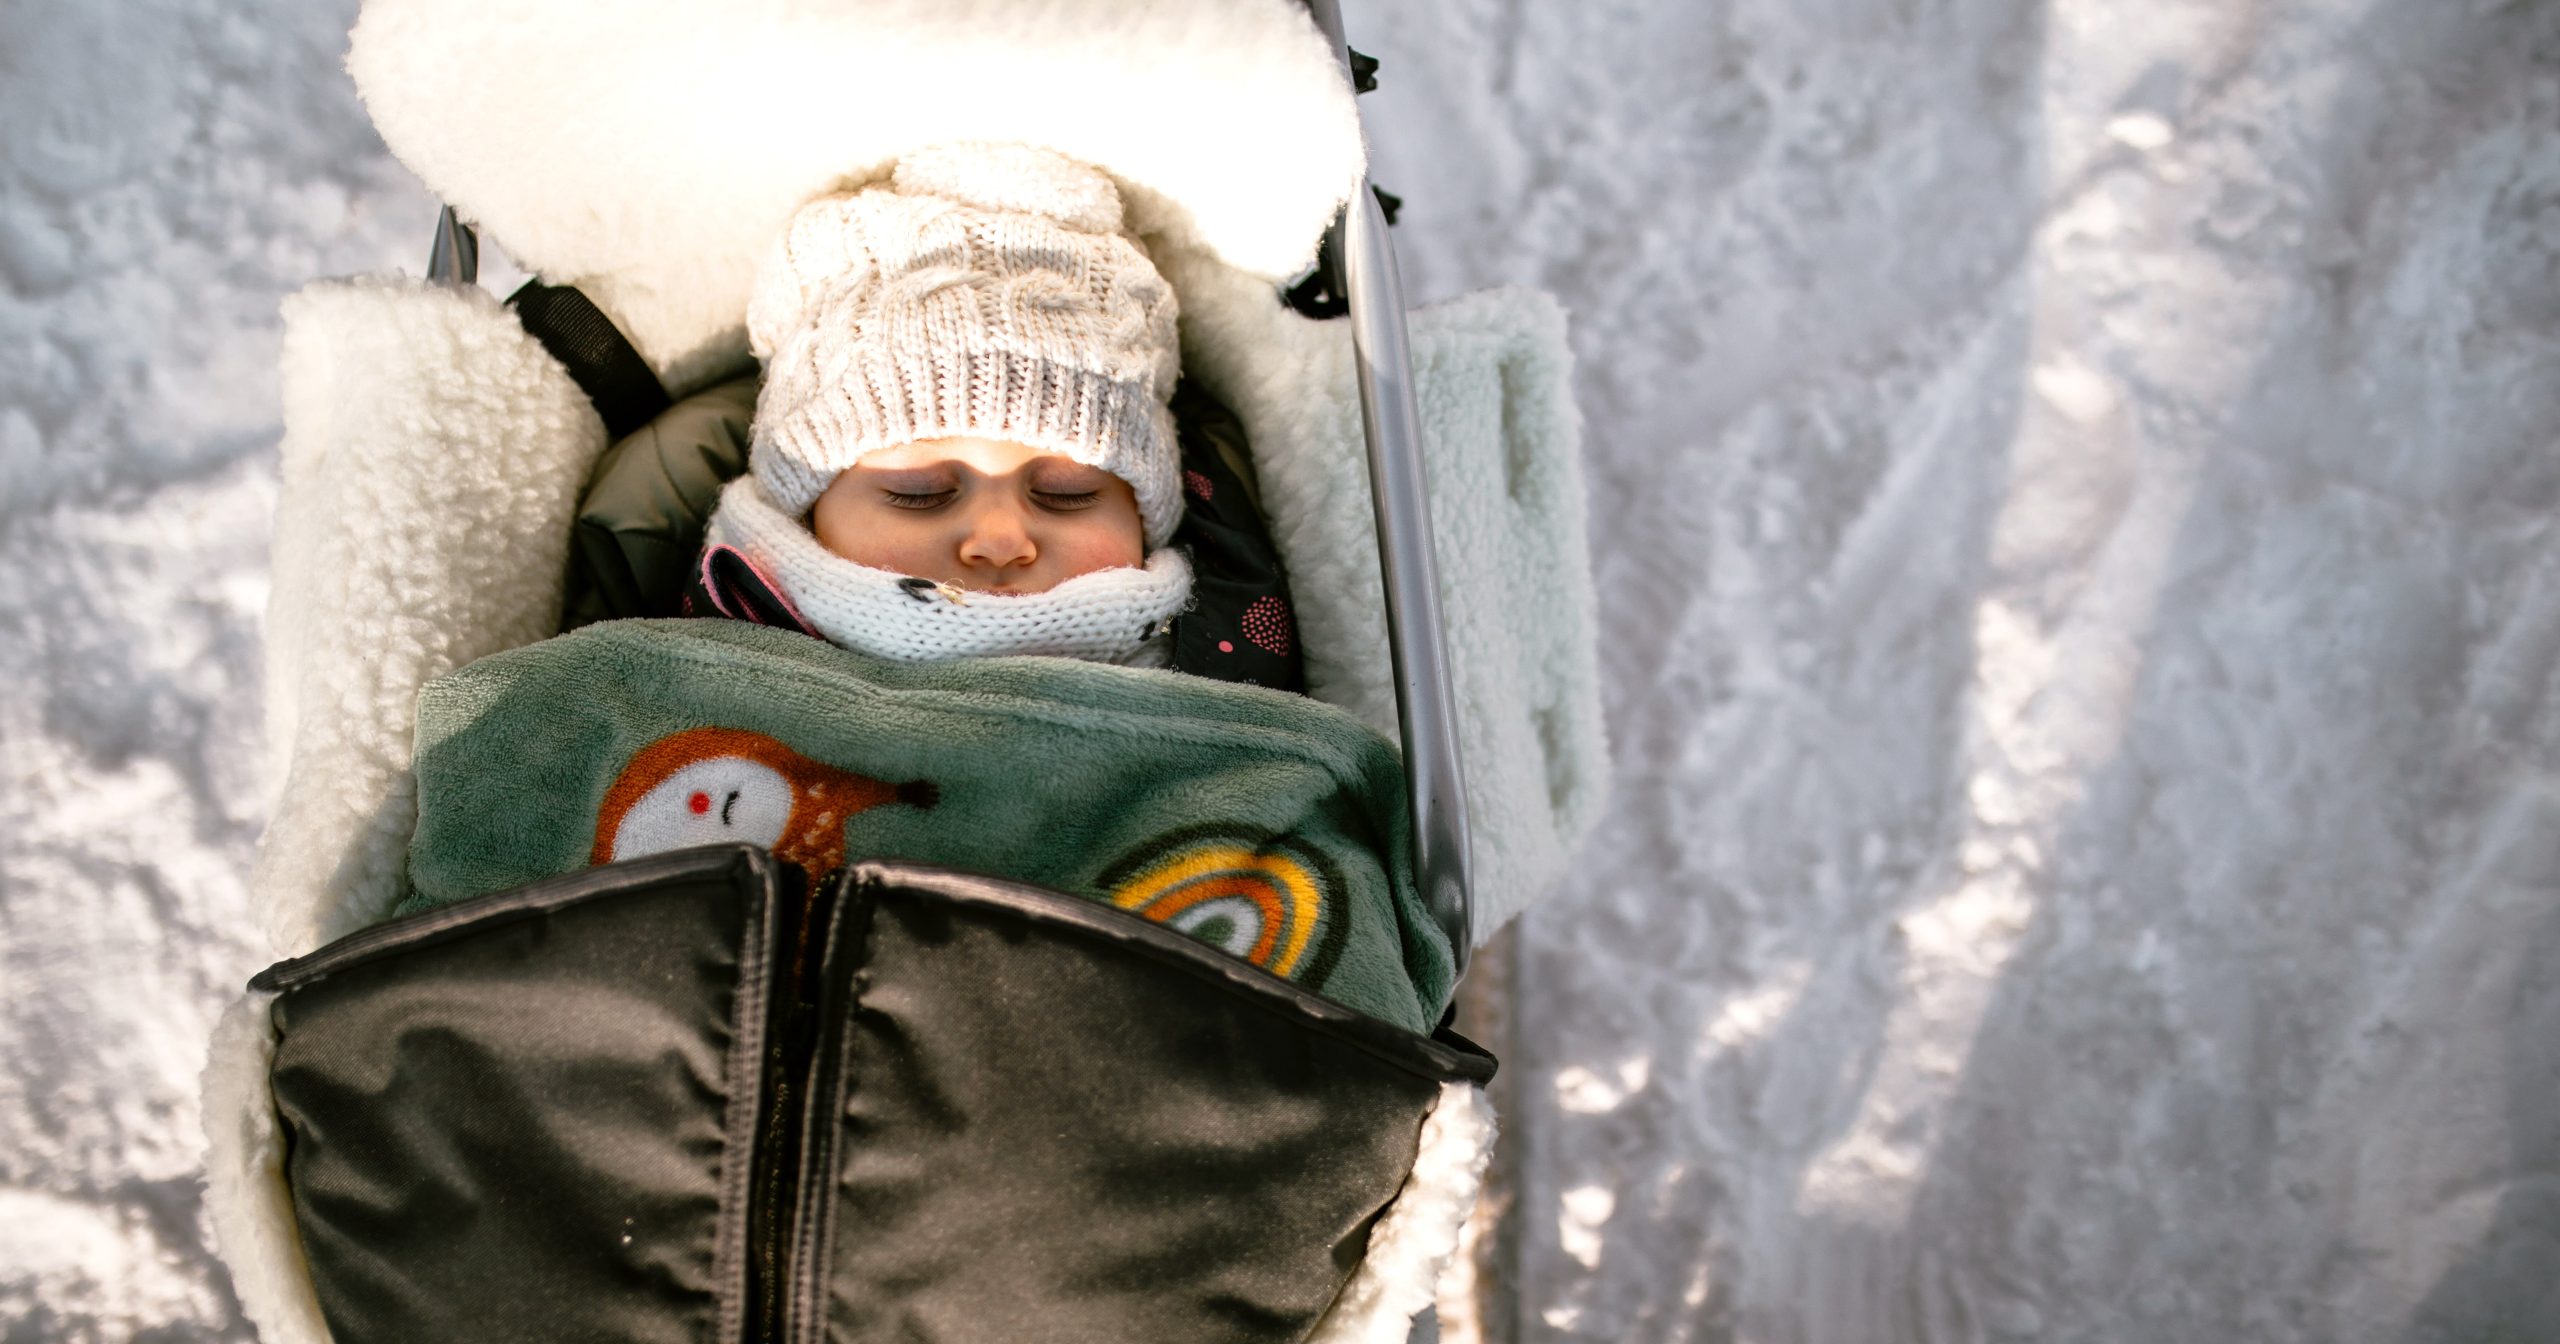 Is It Actually Healthy to Let Babies Nap Outside in the Winter?